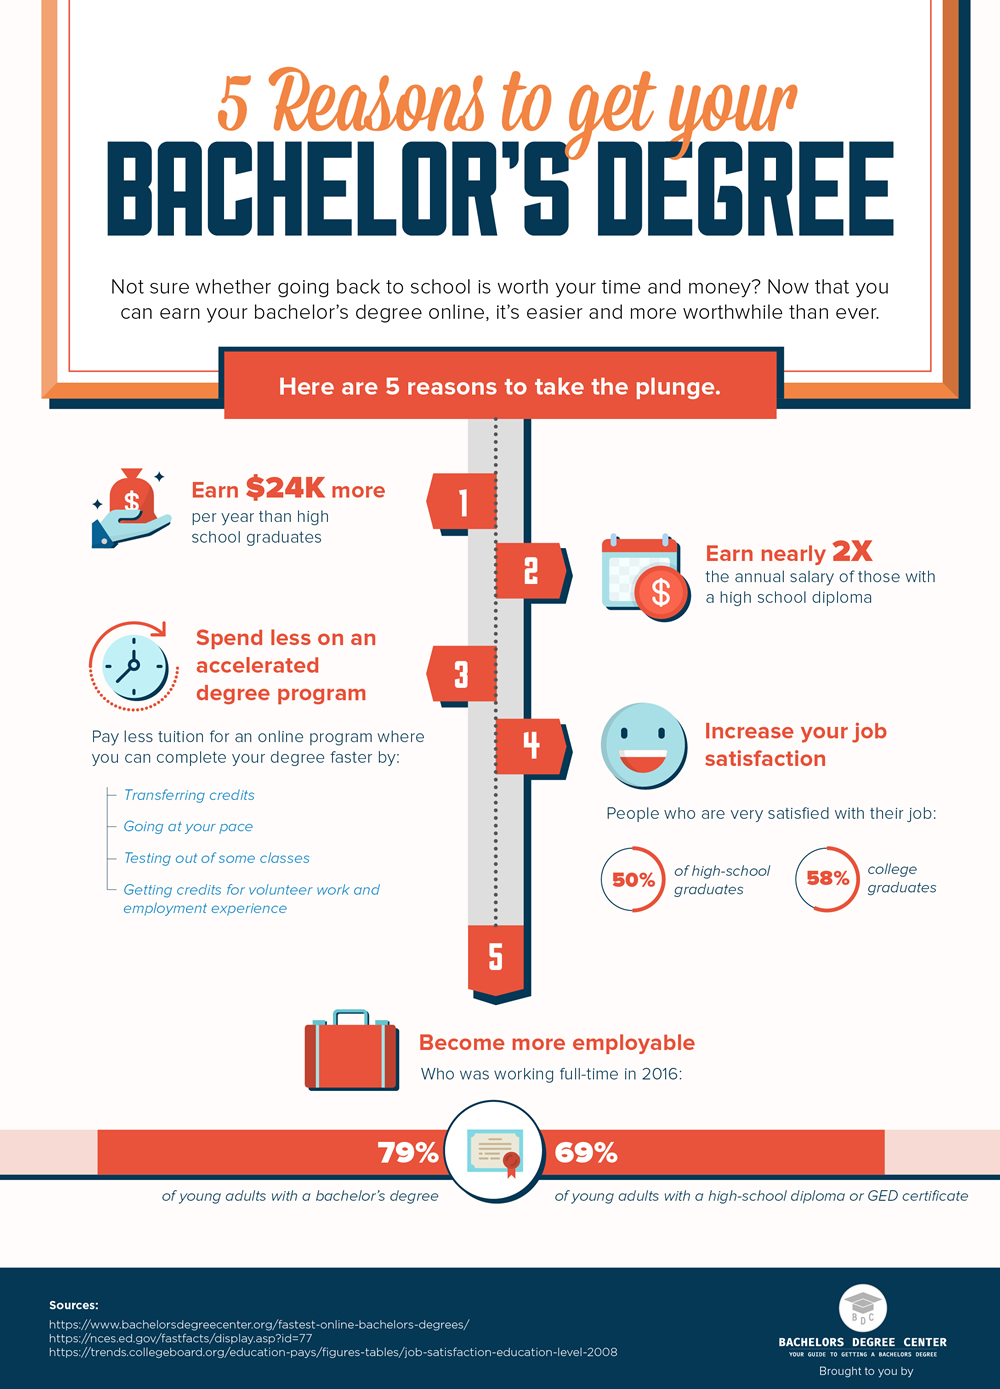 Reasons to Get a Bachelor's Degree